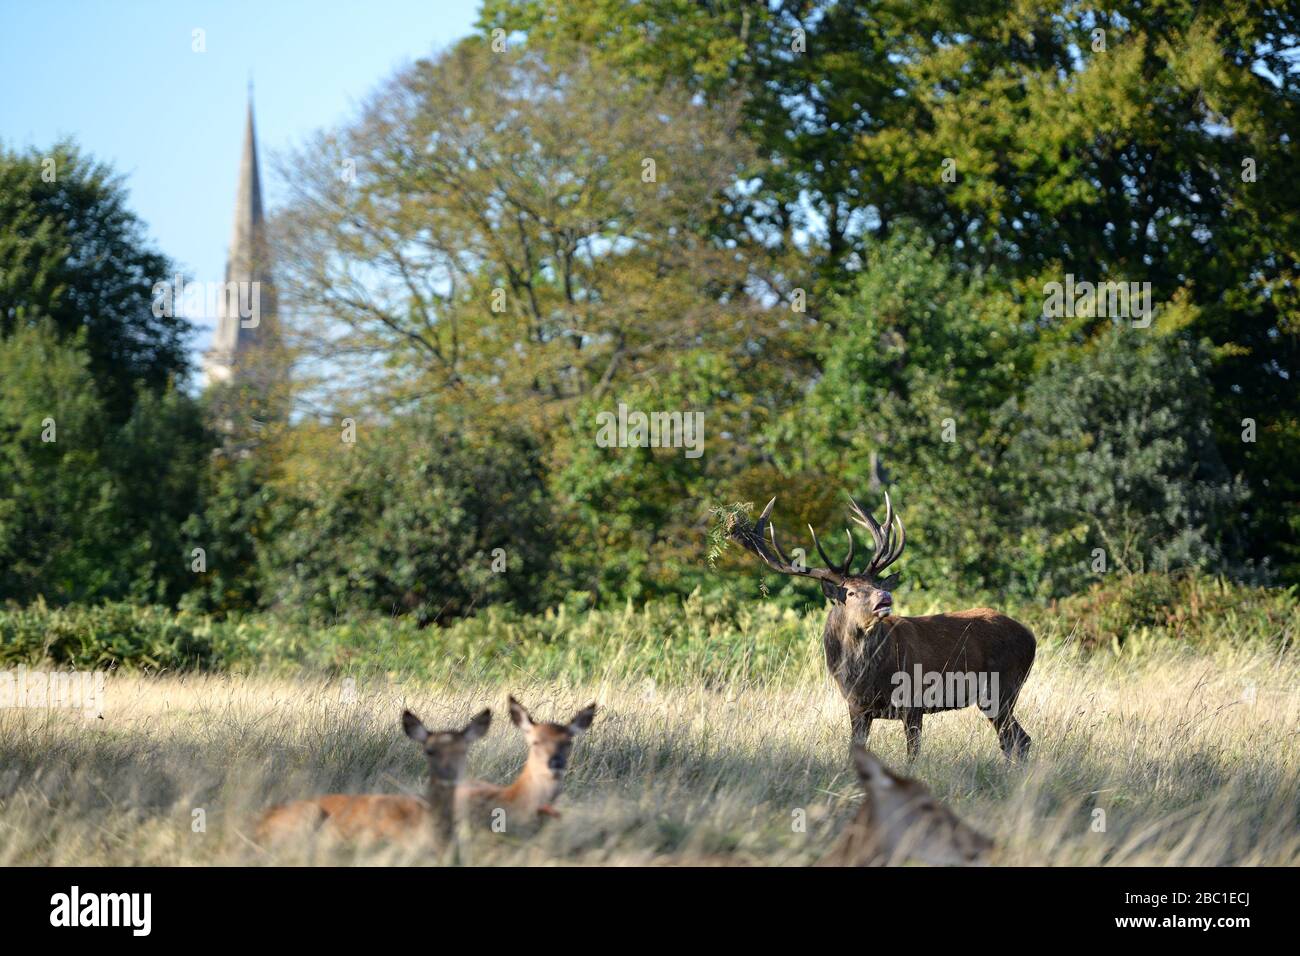 Red deer stag in Richmond Park showing the spire of St Matthias' Church in the background. Stock Photo